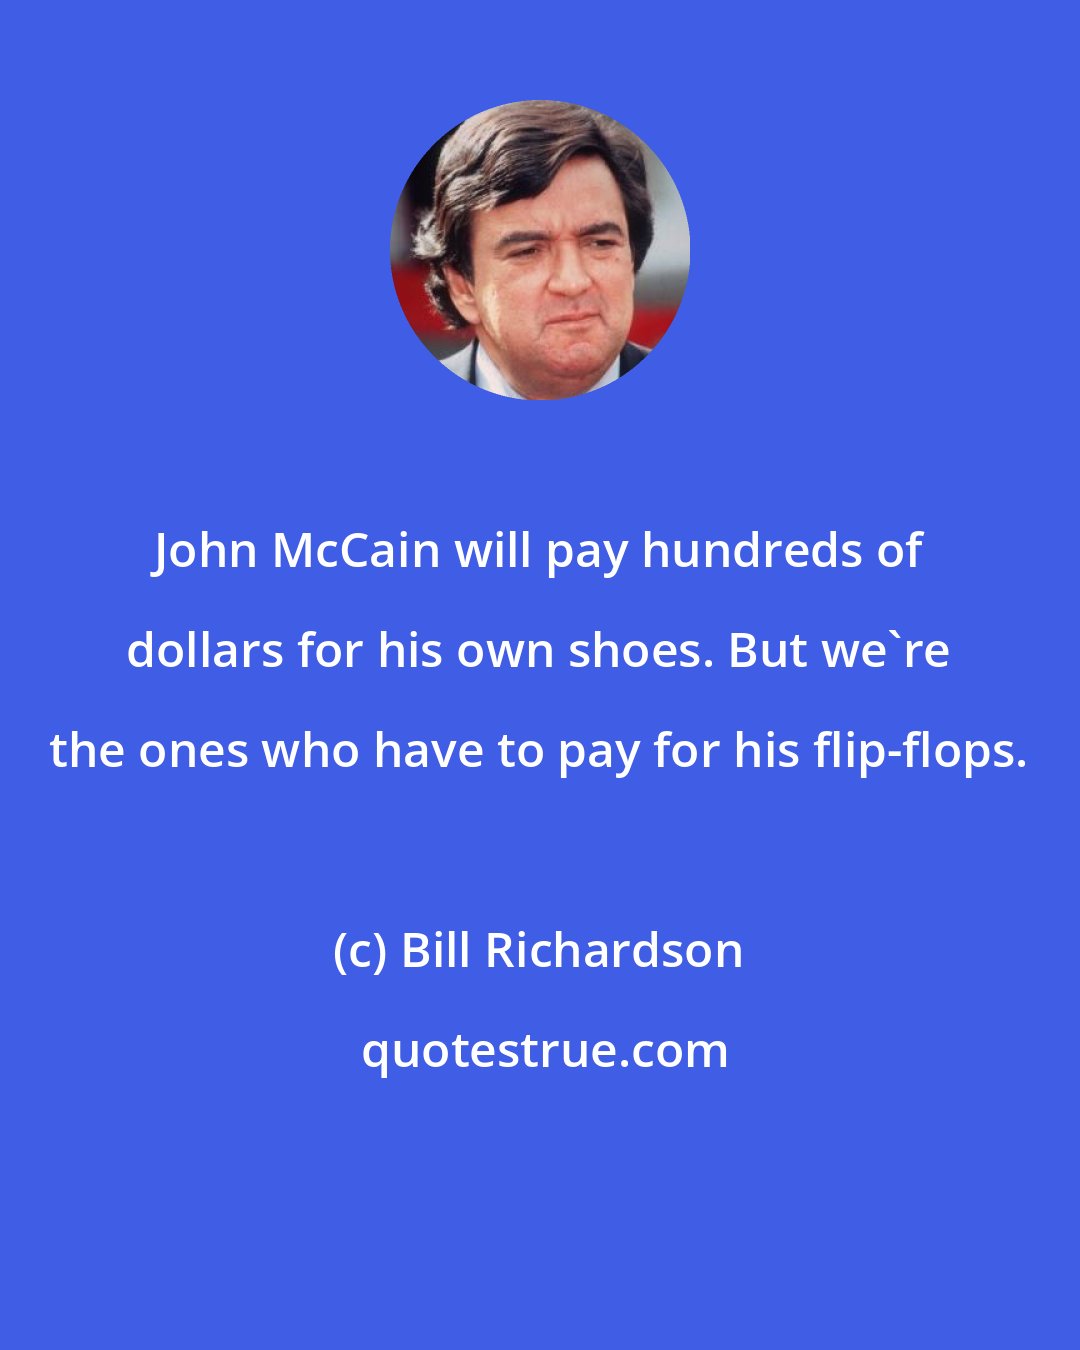 Bill Richardson: John McCain will pay hundreds of dollars for his own shoes. But we're the ones who have to pay for his flip-flops.